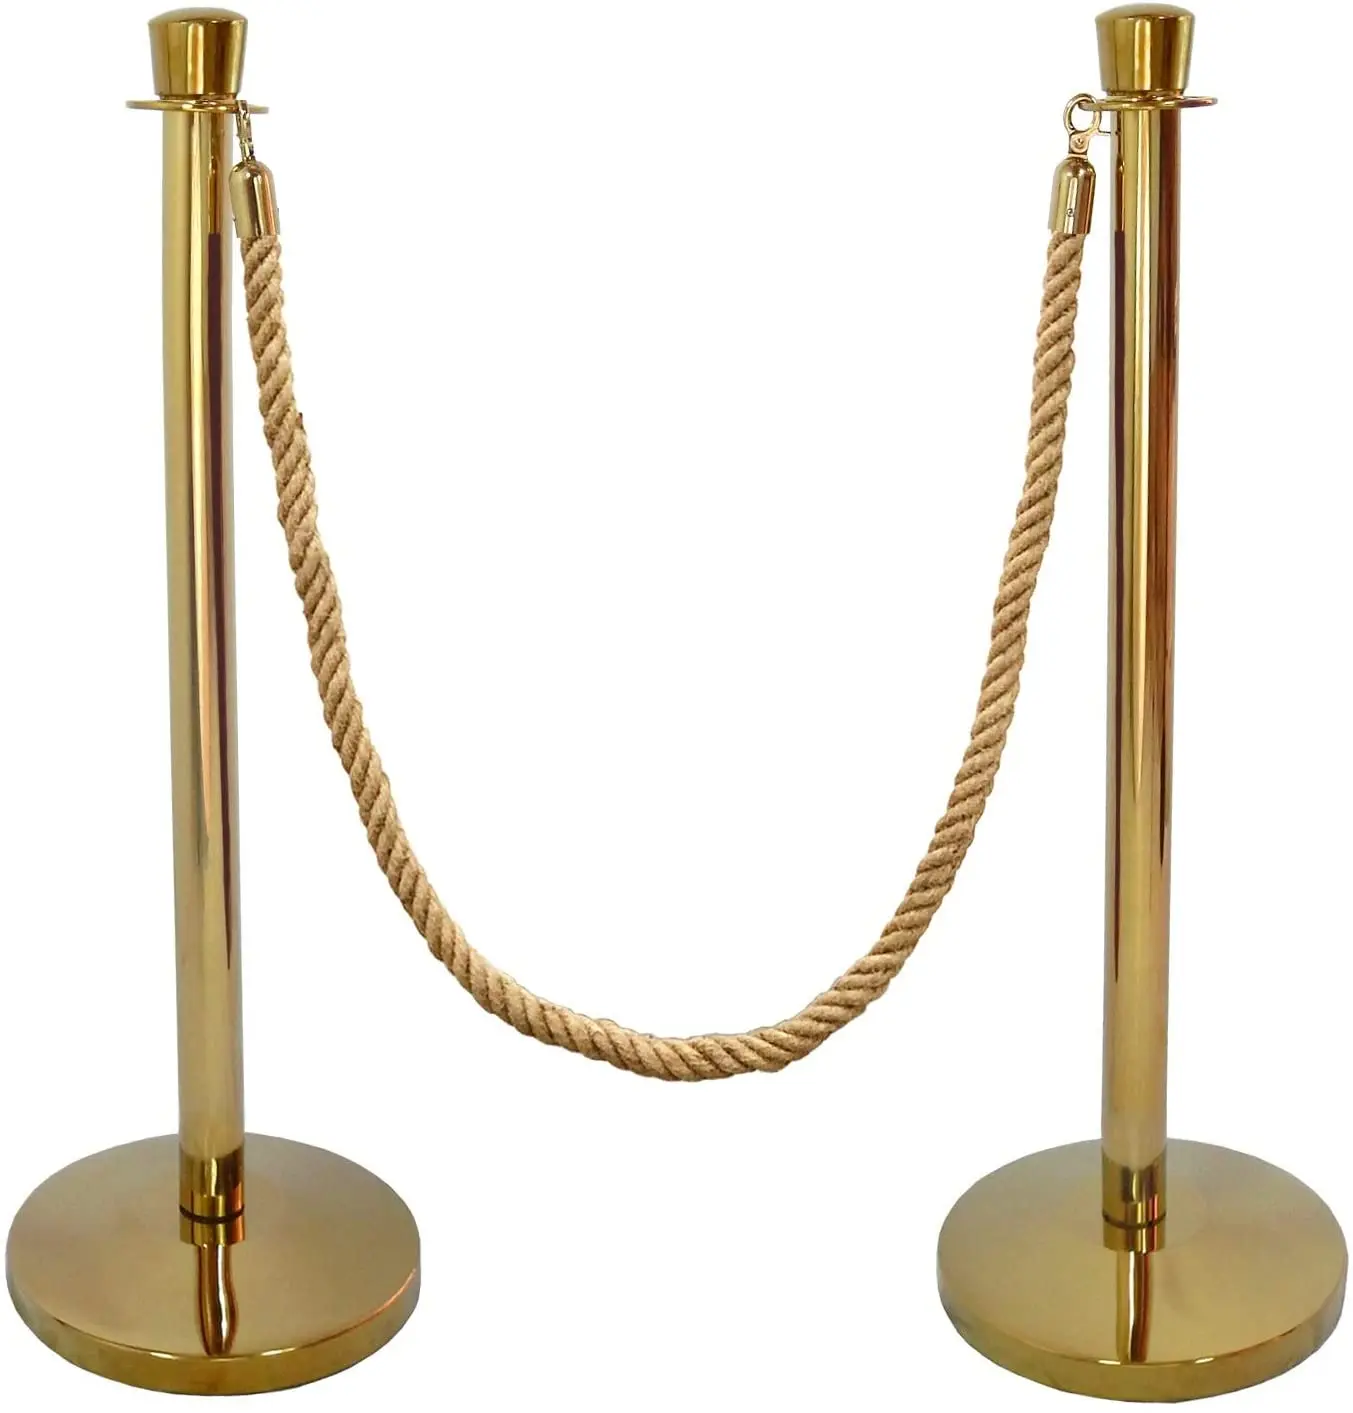 2 TAPER POSTS IN MIRROR S.S+1 ROPE CROWD CONTROL ROPE STANCHION SET DOMED 